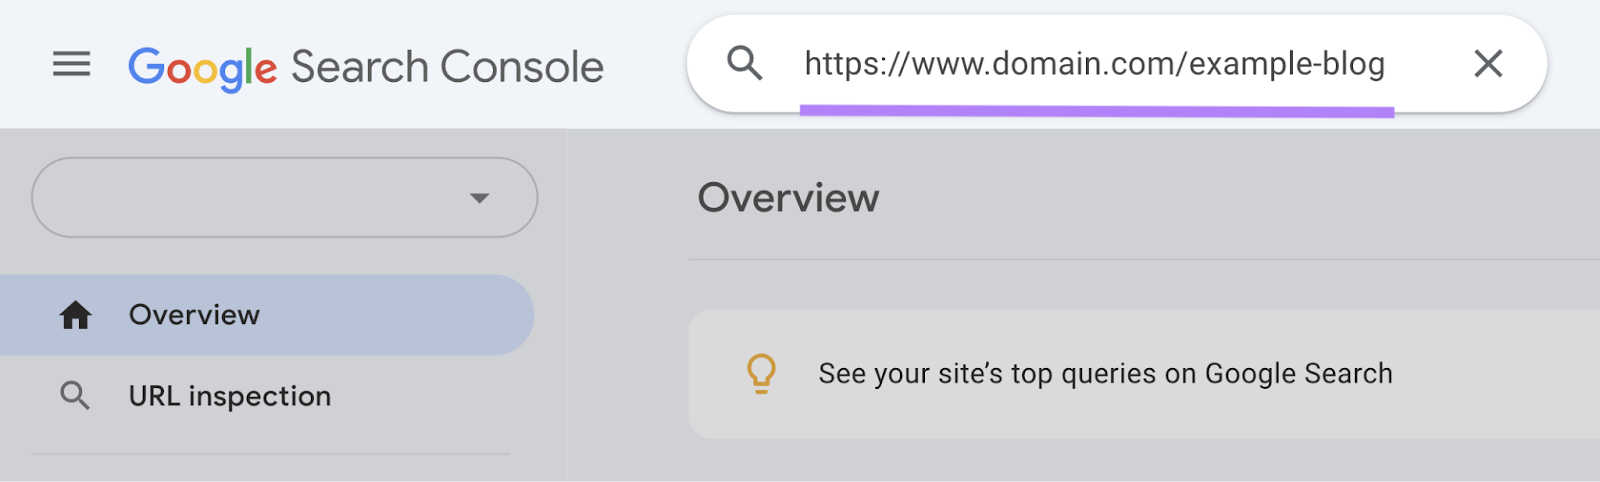 example URL typed into the inspect URL field in google search console